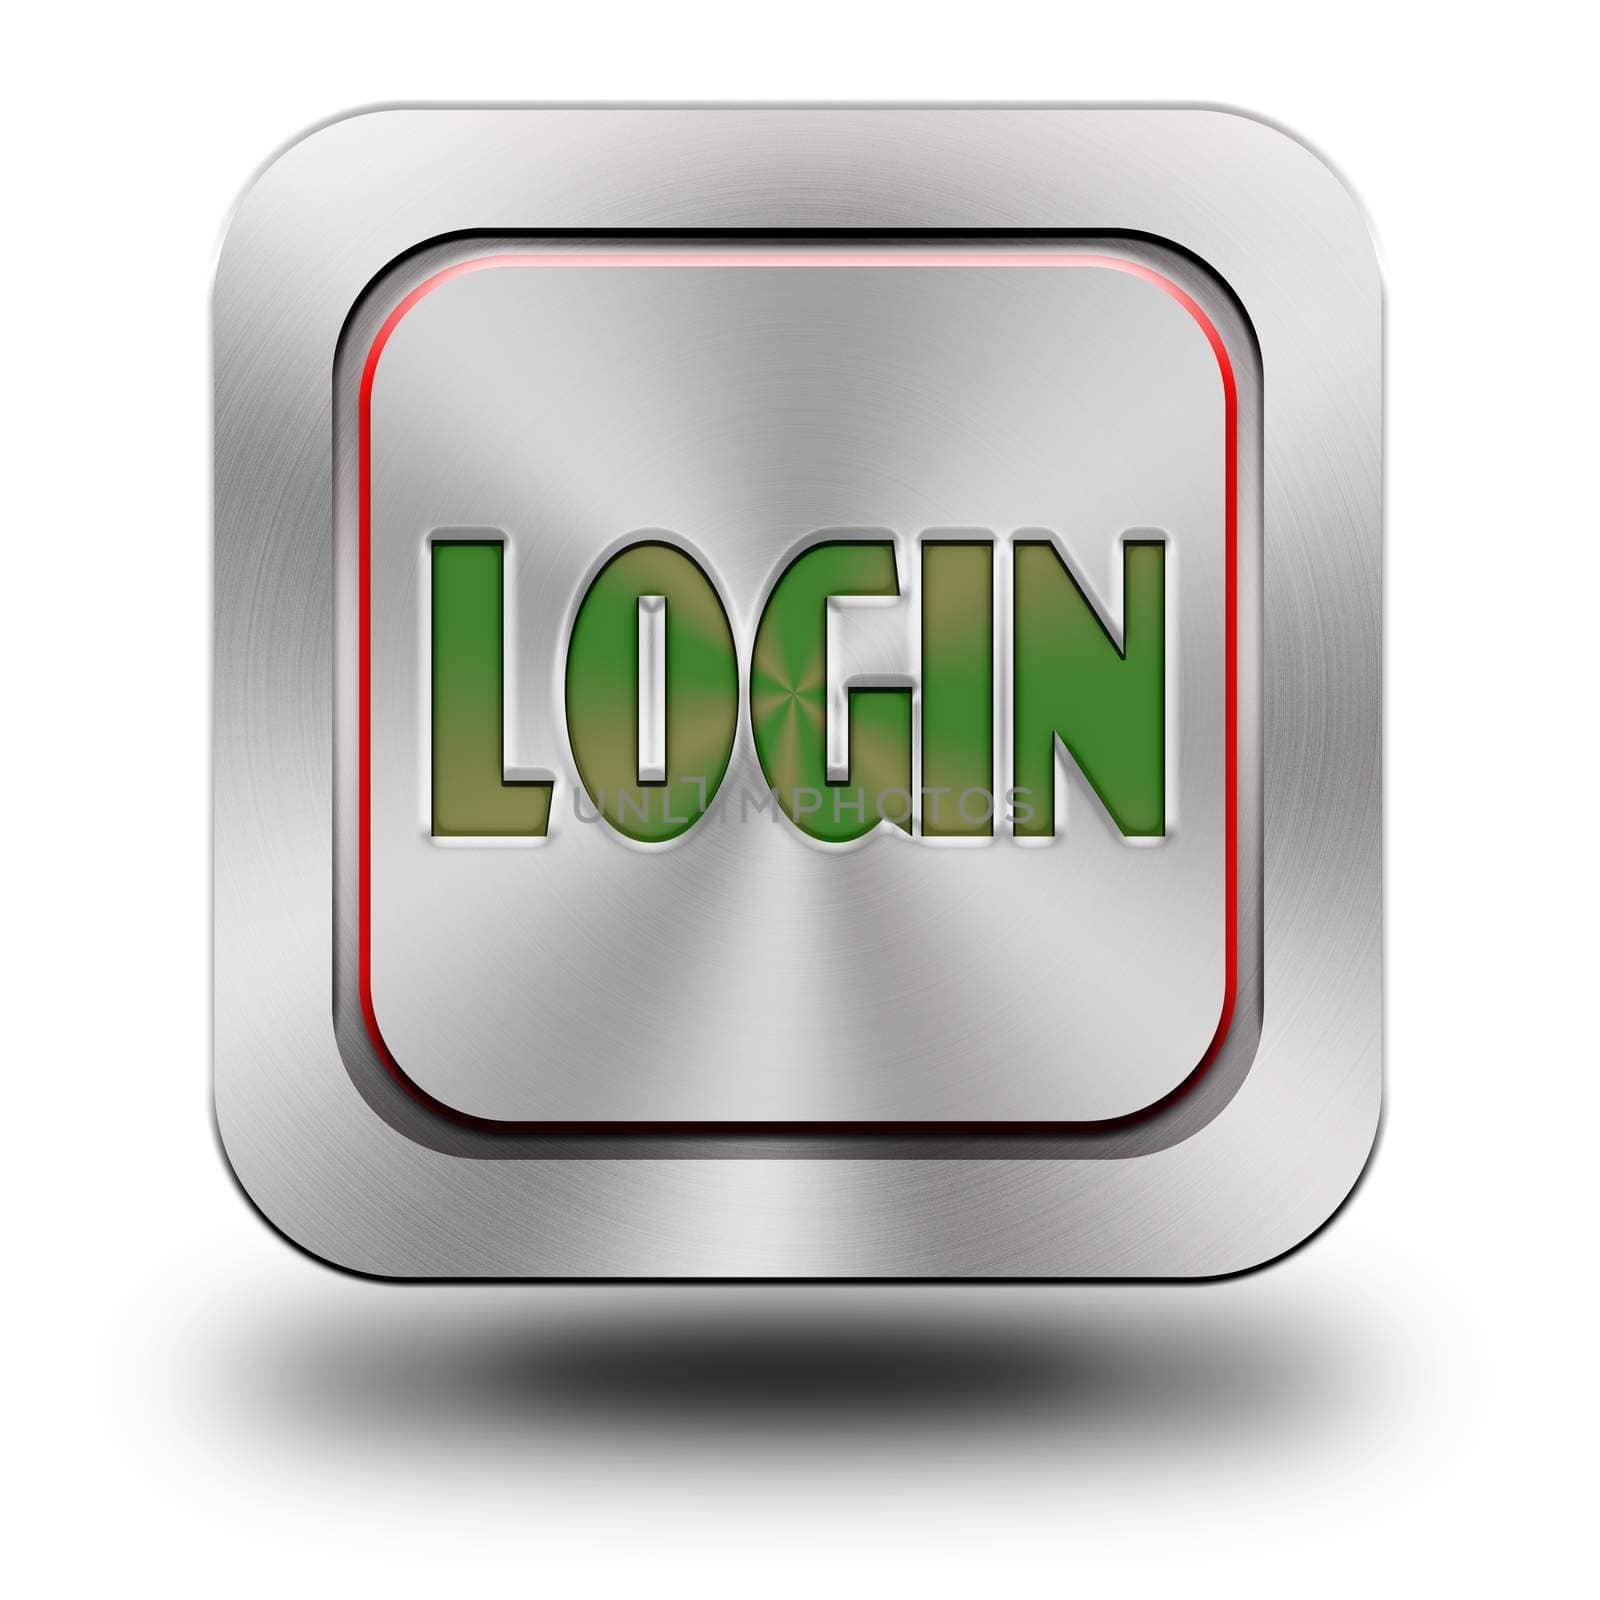 Login, aluminum, steel, chromium, glossy, icon, button, sign, icons, buttons, crazy colors